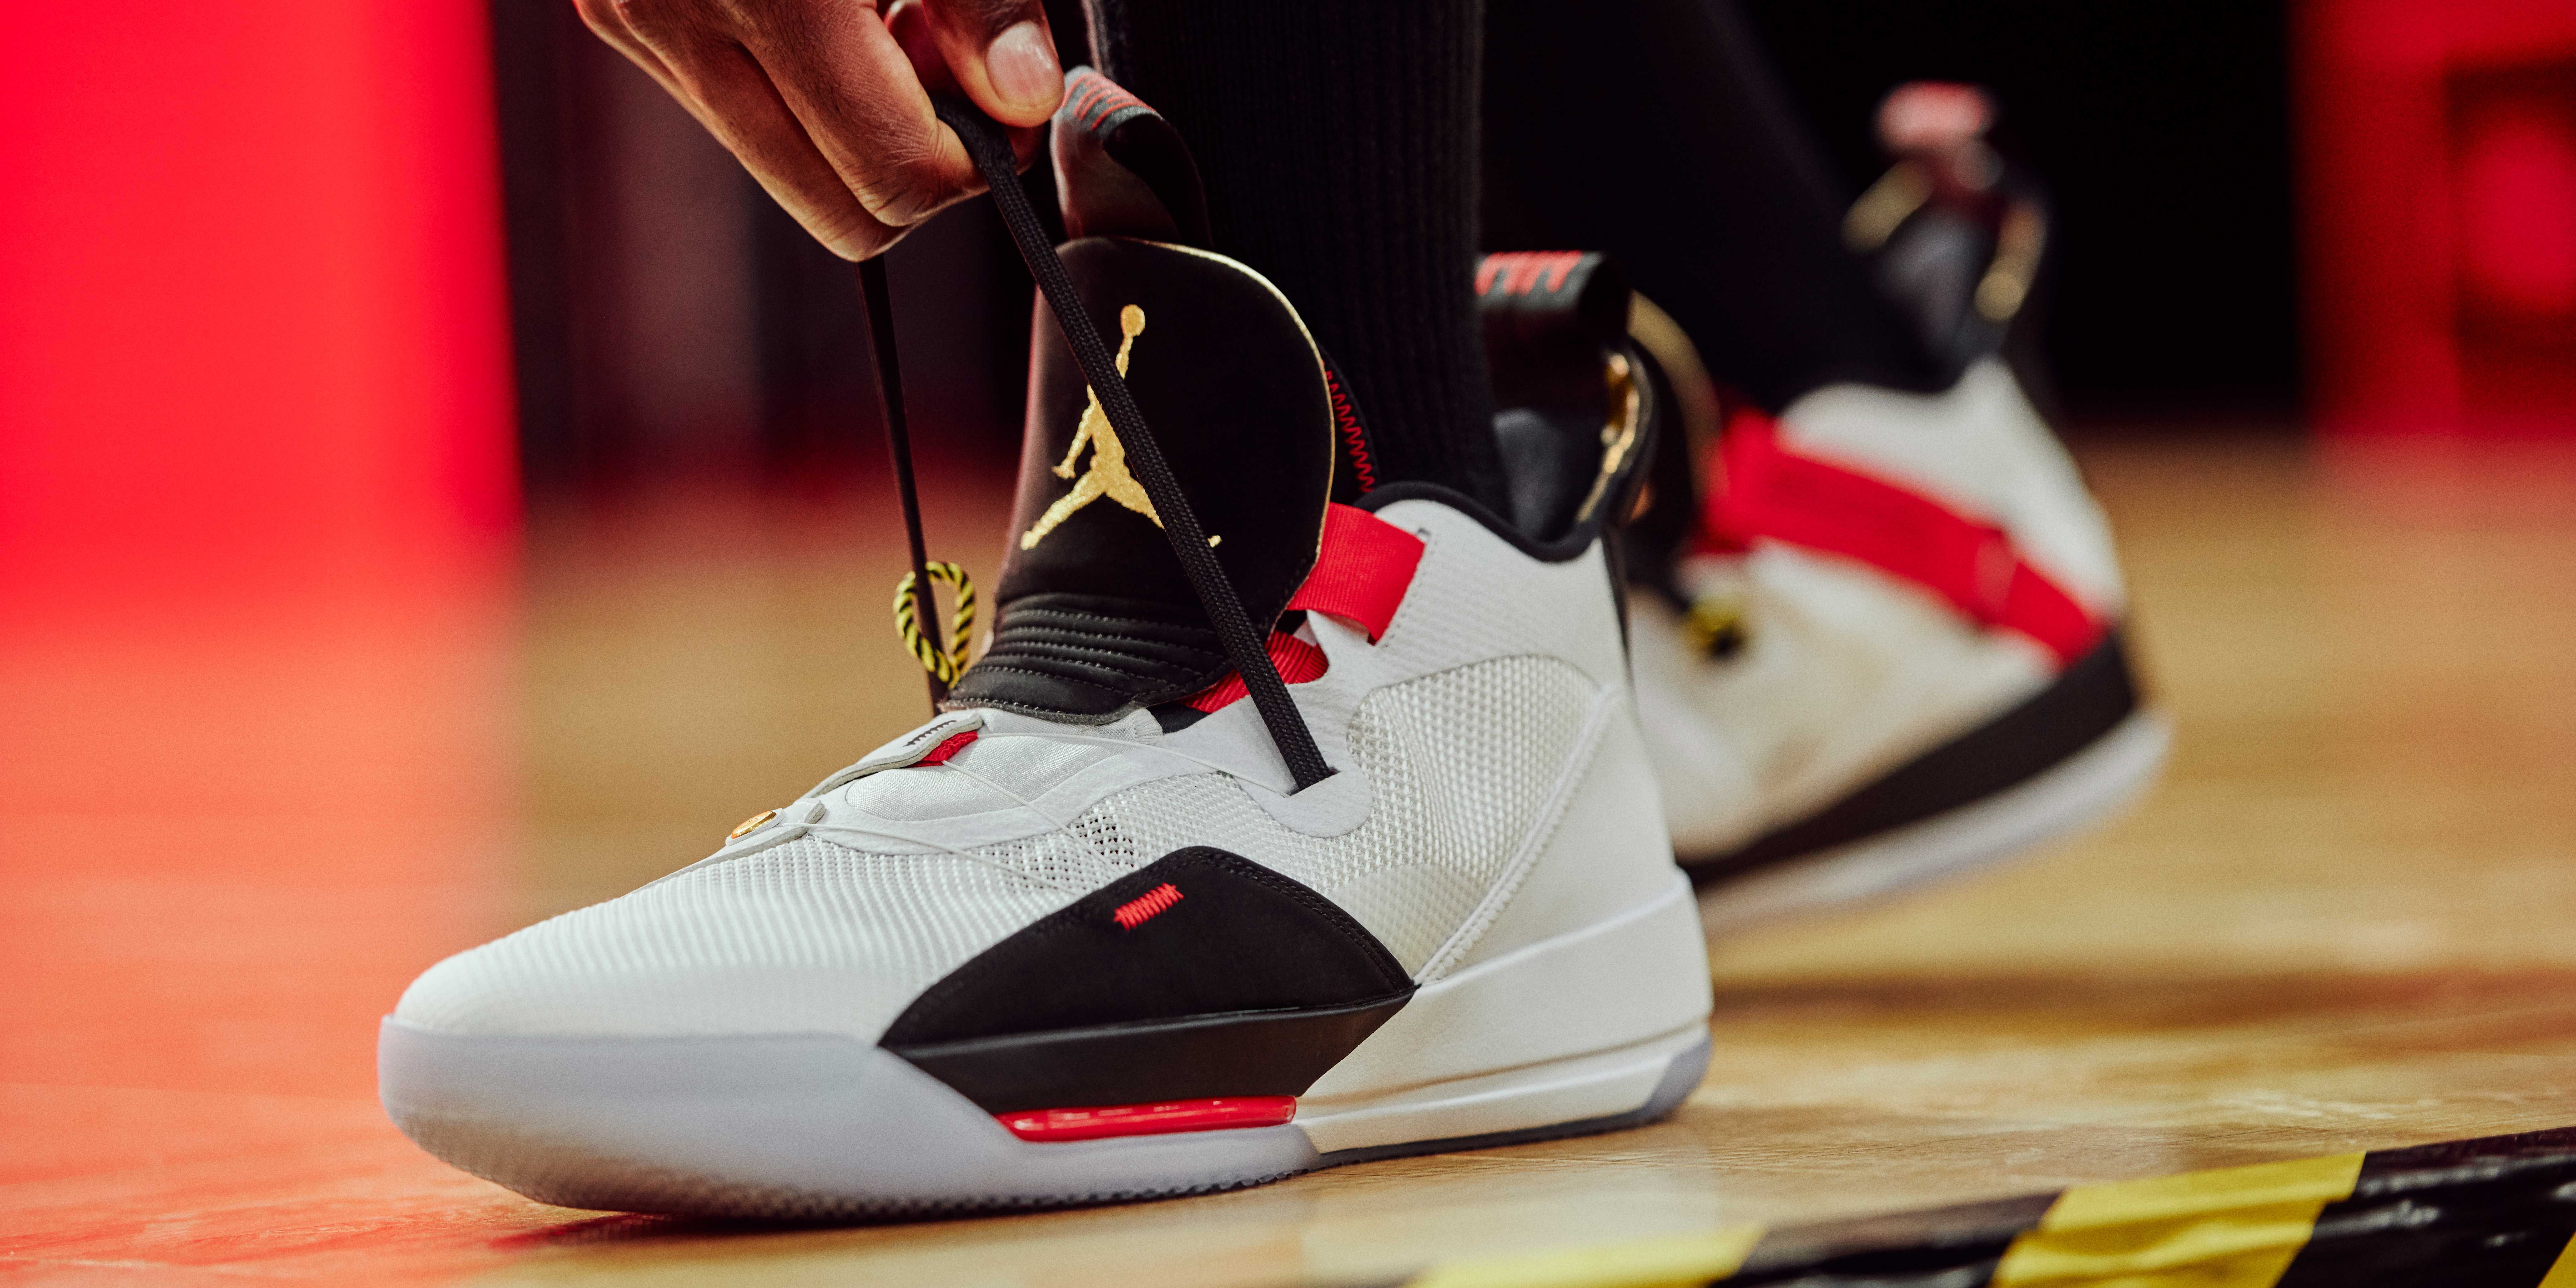 The Air Jordan 33 Is Designed to Change the Game